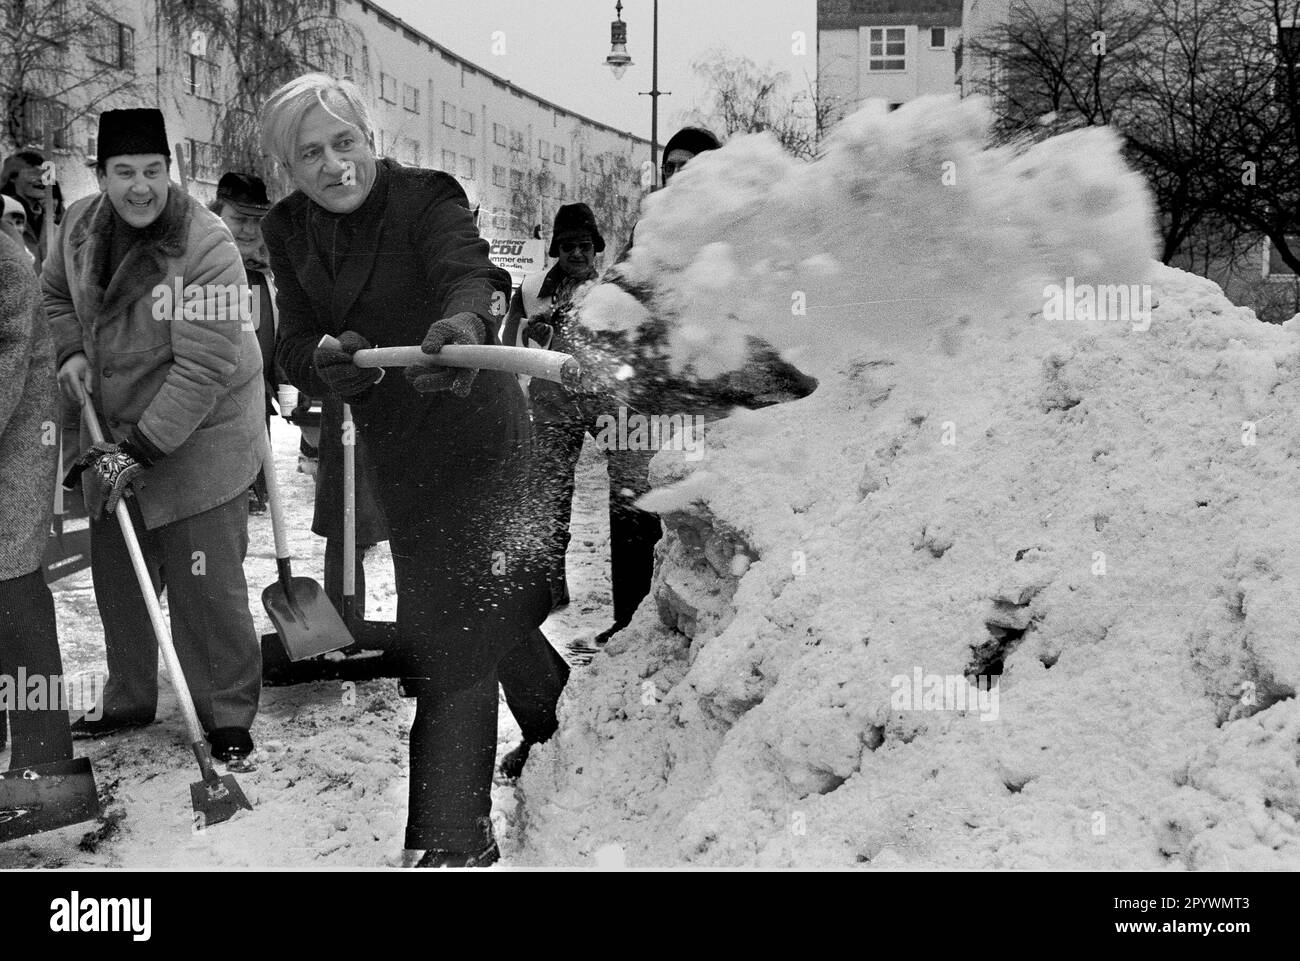 Federation / Politics / CDU / 1979 Richard von Weizsaecker shovels snow, behind him Karl-Heinz Schmitz. That year there was heavy snowfall, and traffic in Berlin partially collapsed. The CDU uses this for the election campaign and helps shovelling. // Seasons / Weather / Snow / Winter [automated translation] Stock Photo